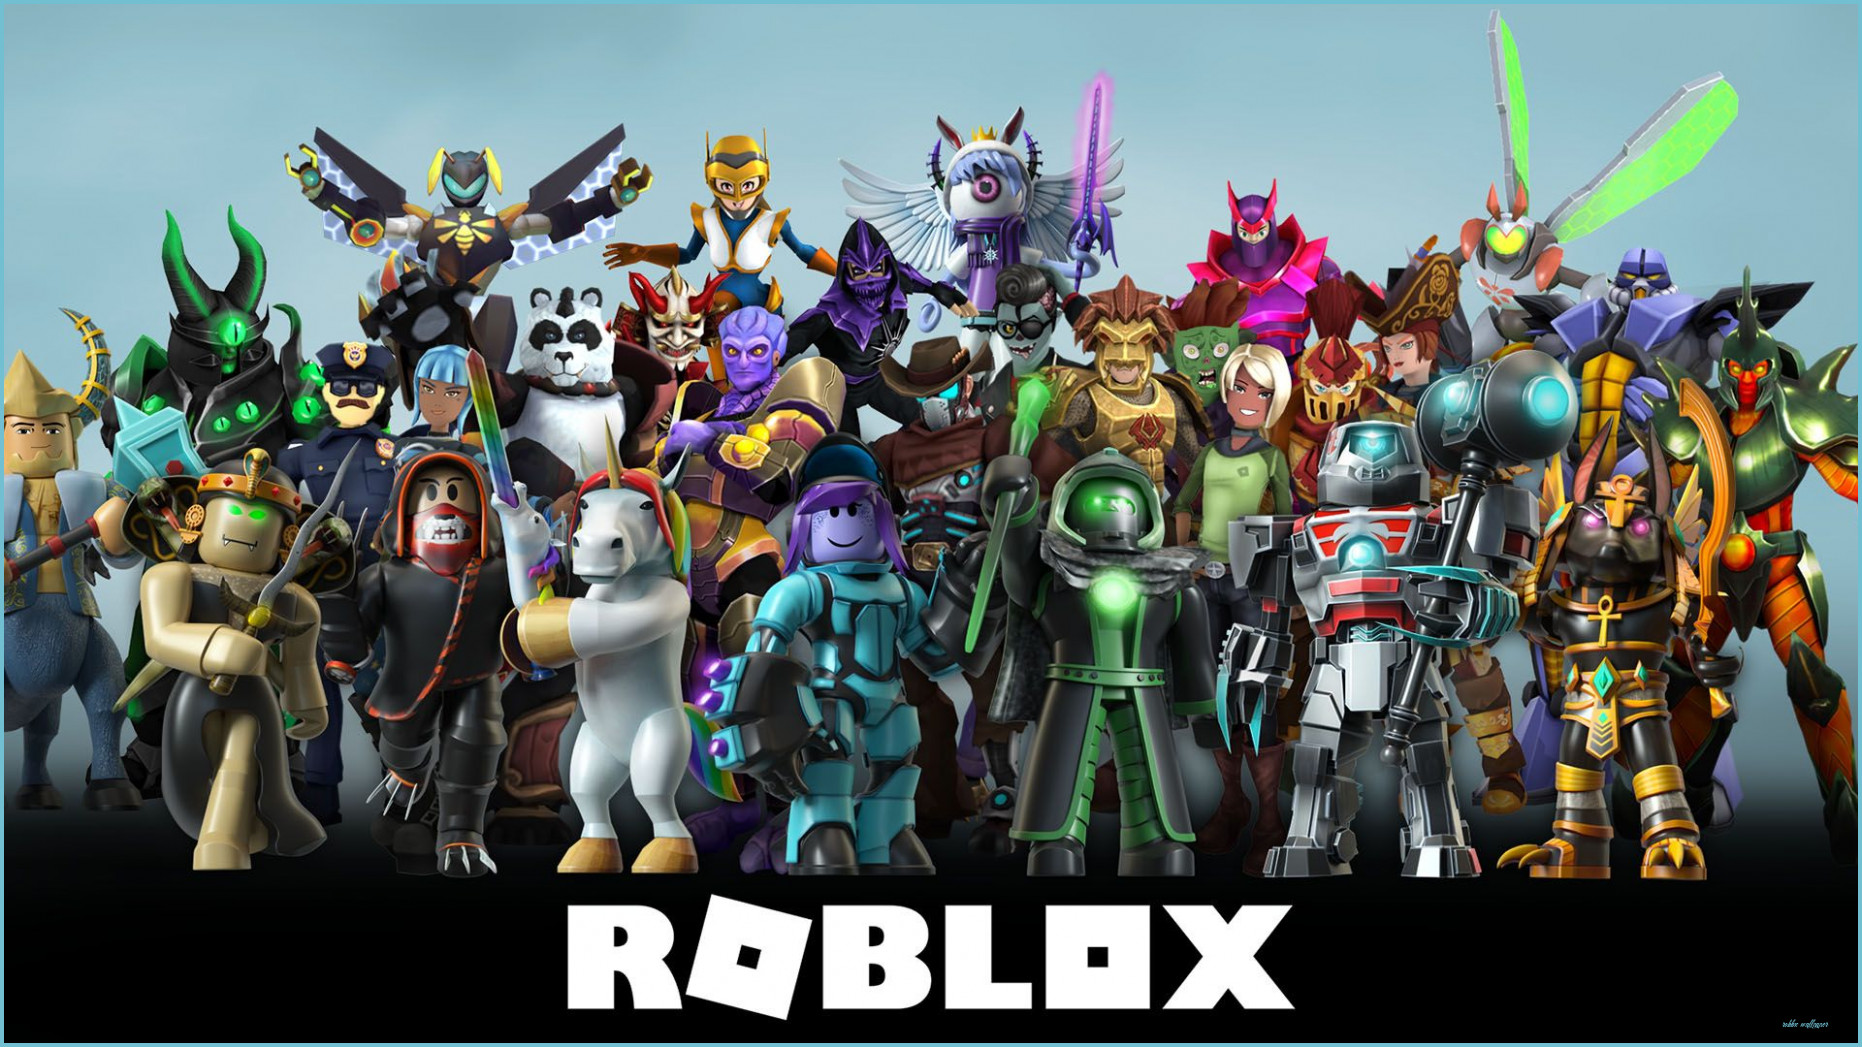 Featured image of post Roblox Wallpaper For Boys Aesthetic Shuffle all roblox and roblox pictures randomized background images or more hd wallpapers of roblox will be added soon